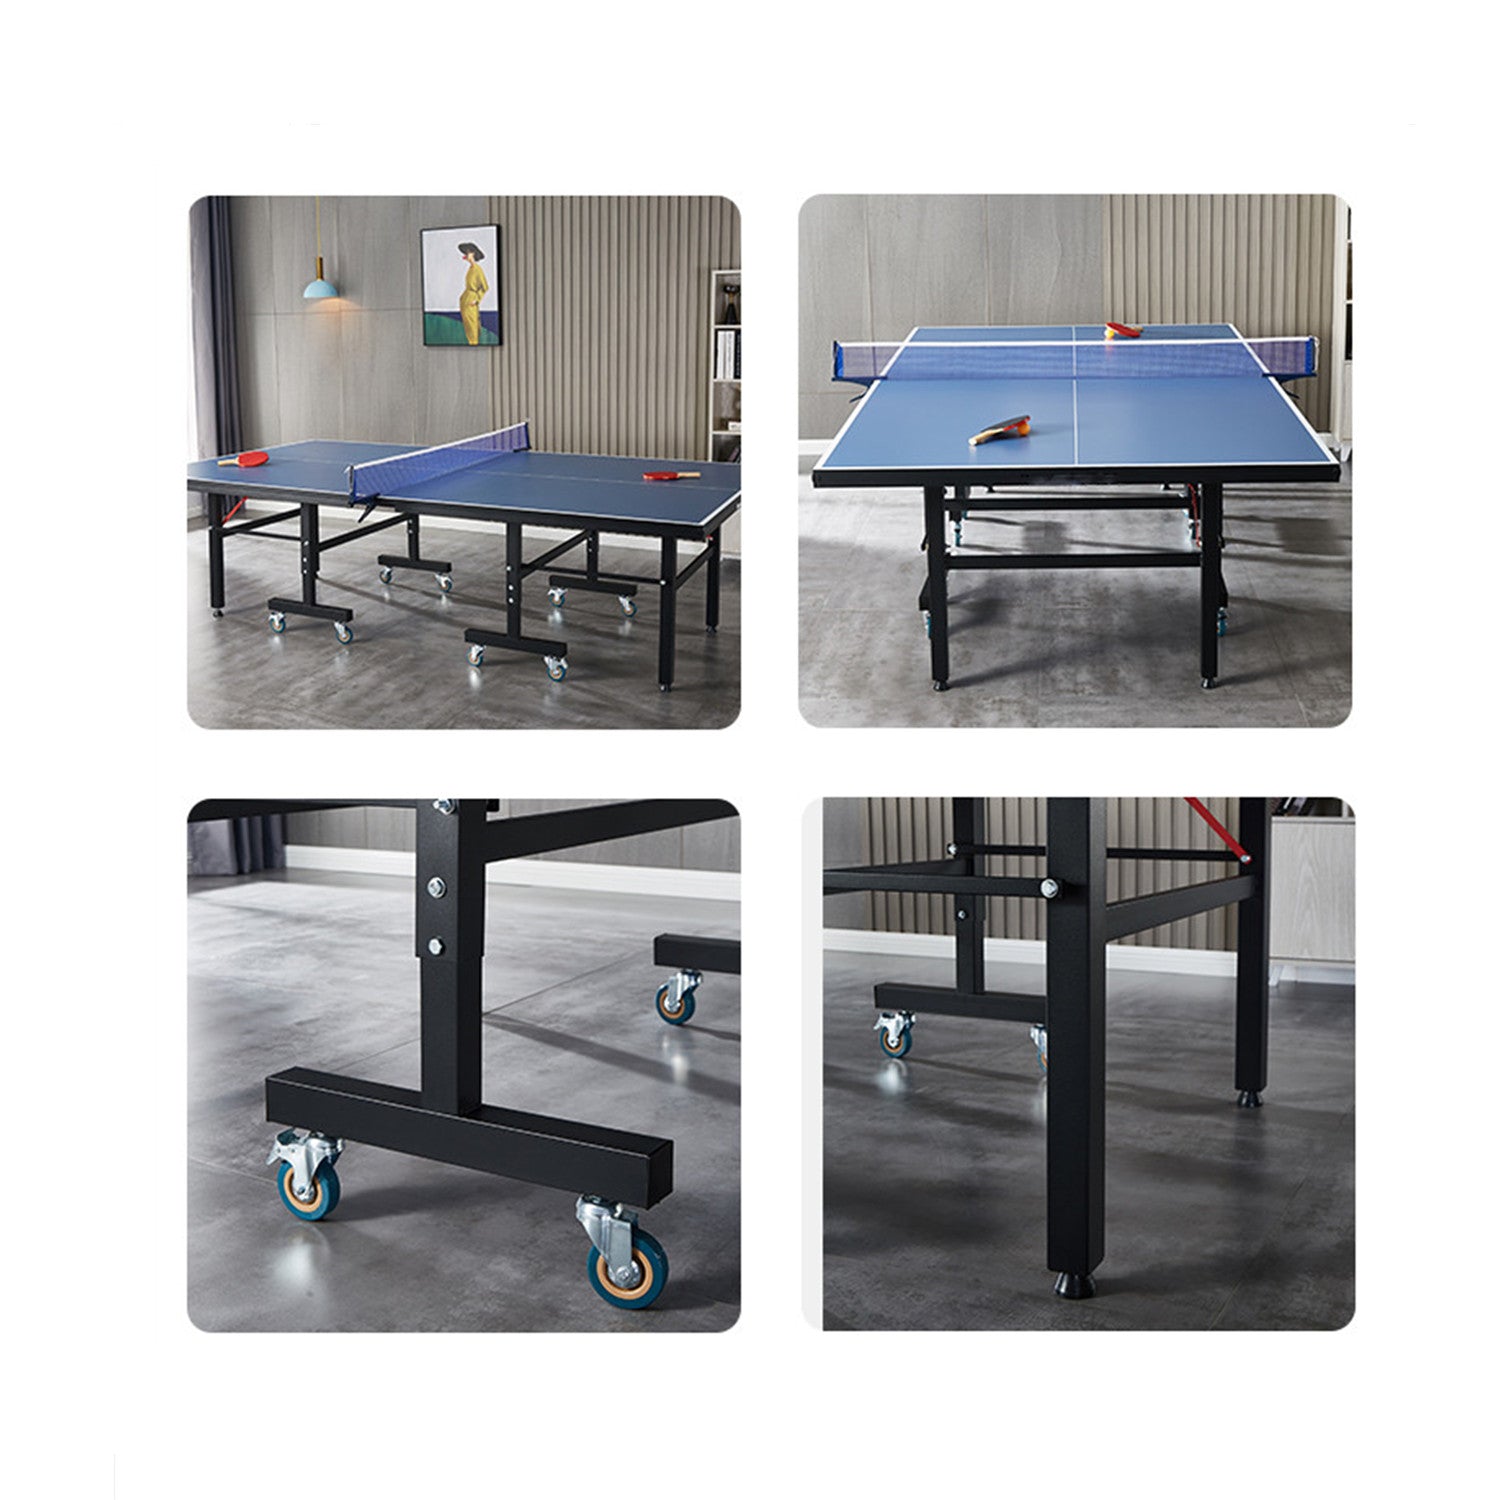 UXUAN SPORTS Indoor Elite Series 19mm Table Tennis Table|10-Minute Assembly